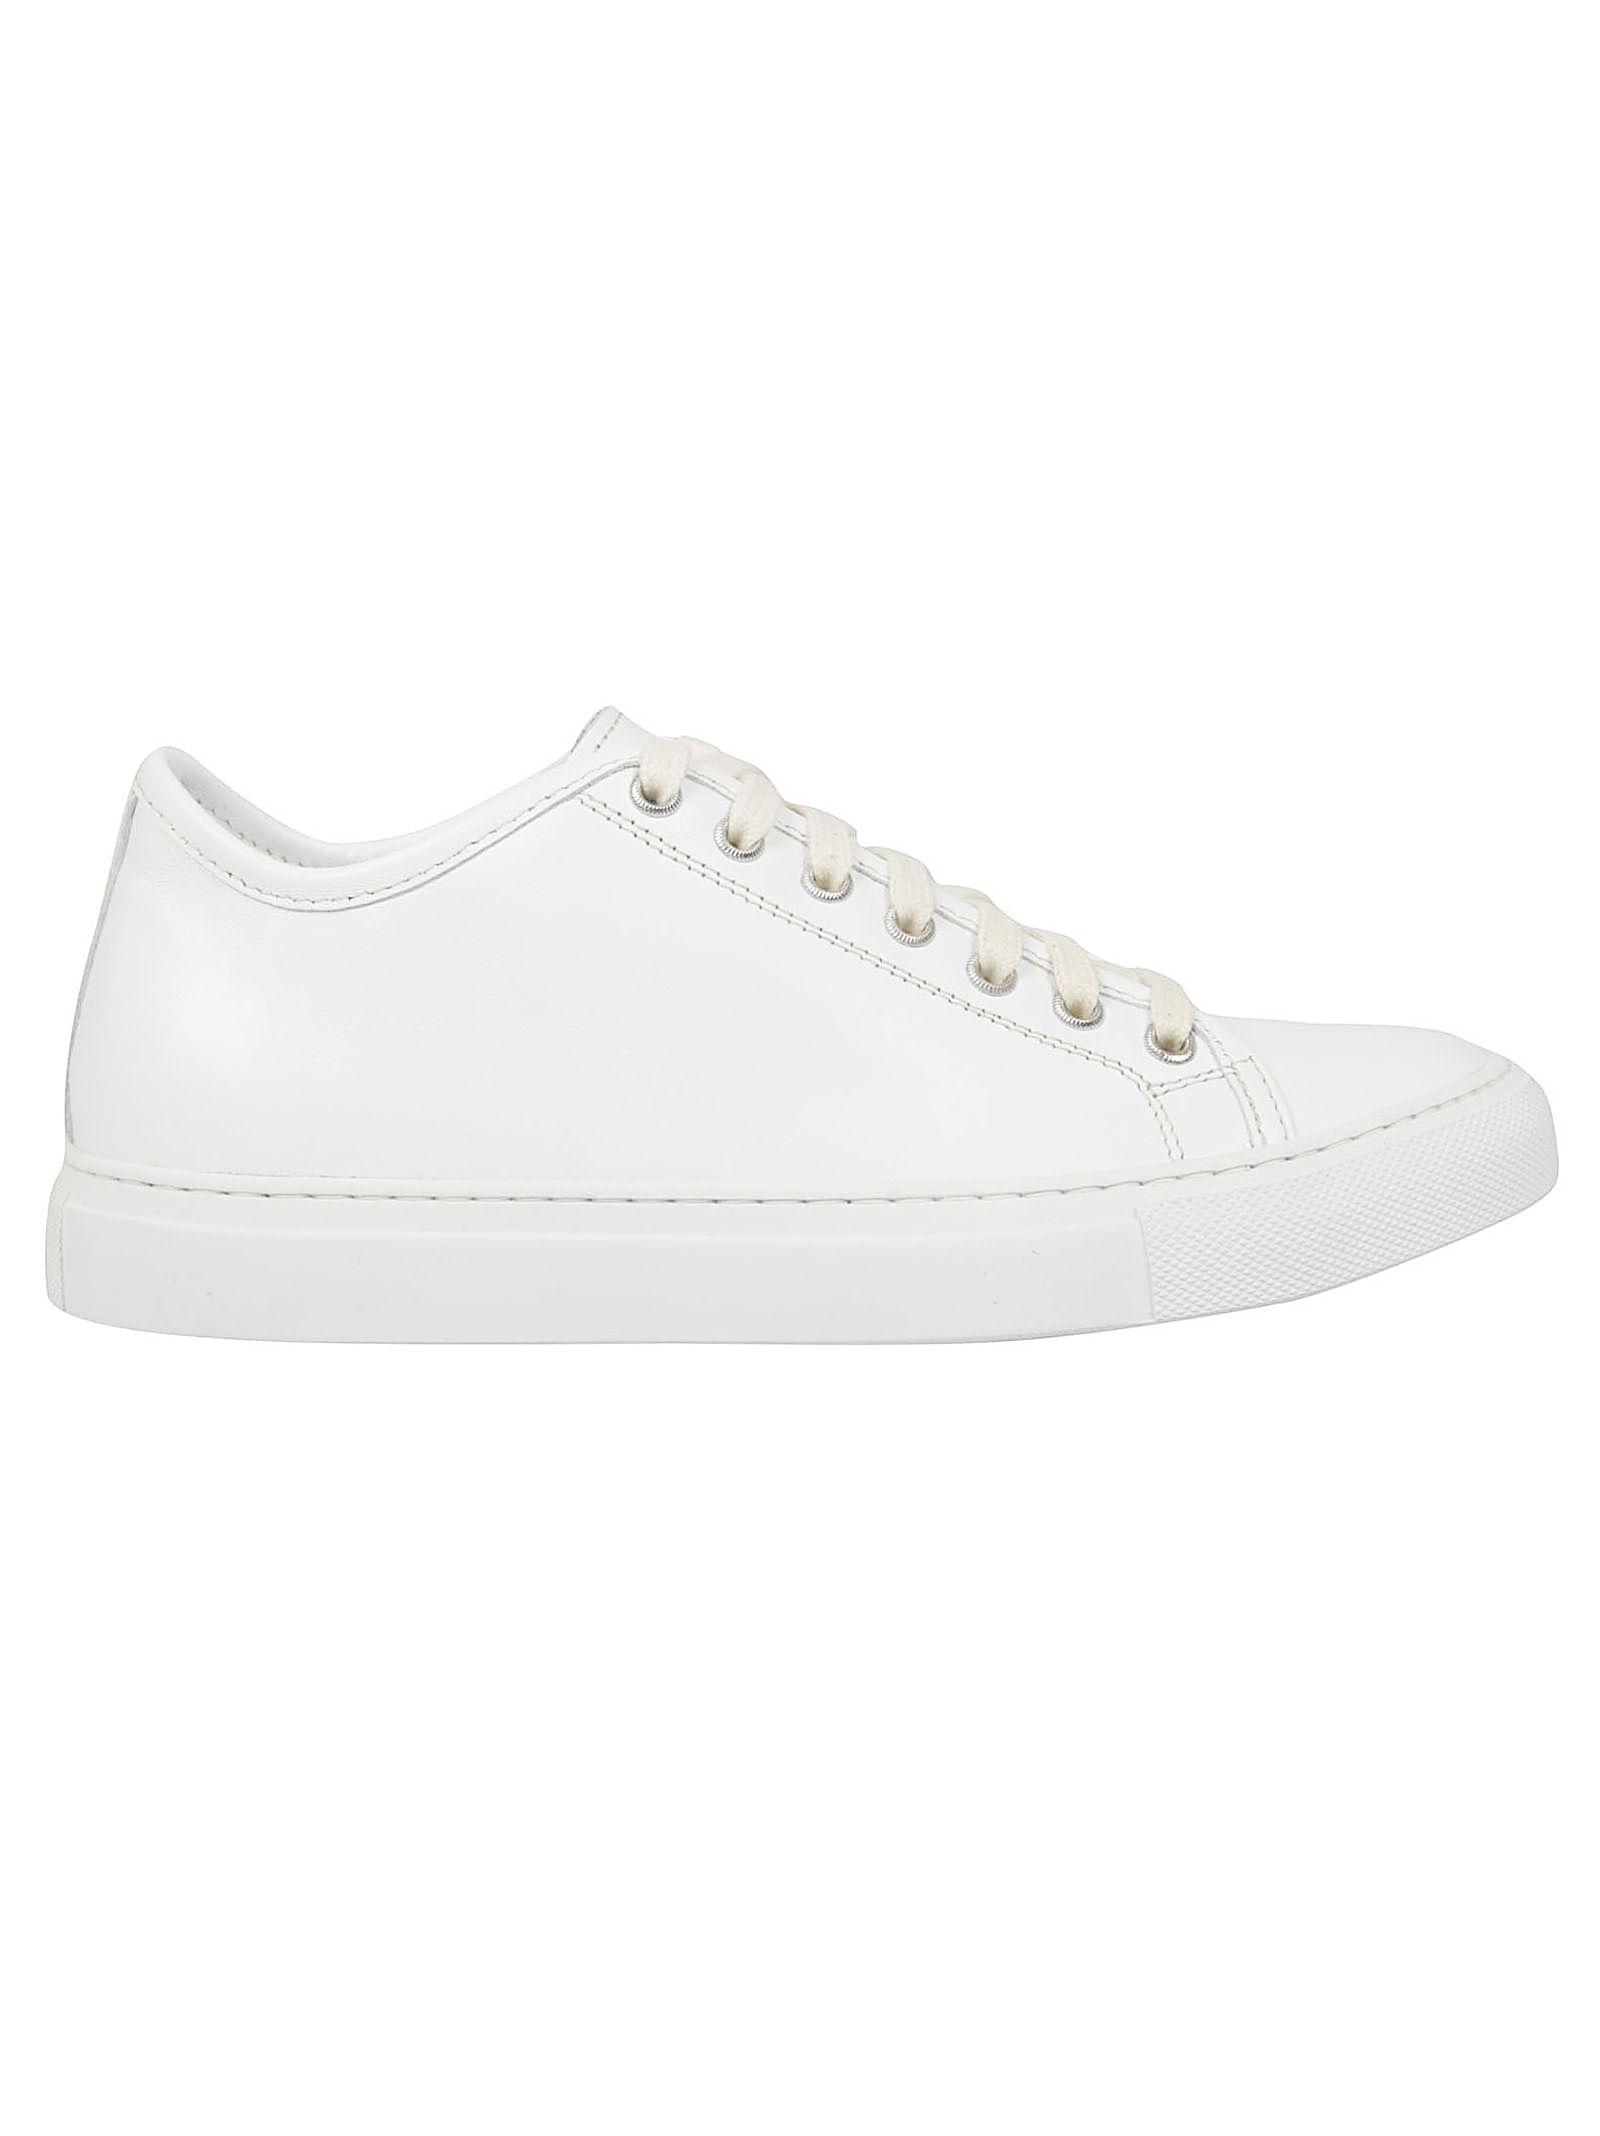 Sofie d'Hoore Sofie D'hoore Frida Laced-up Sneakers - White - 10929536 ...